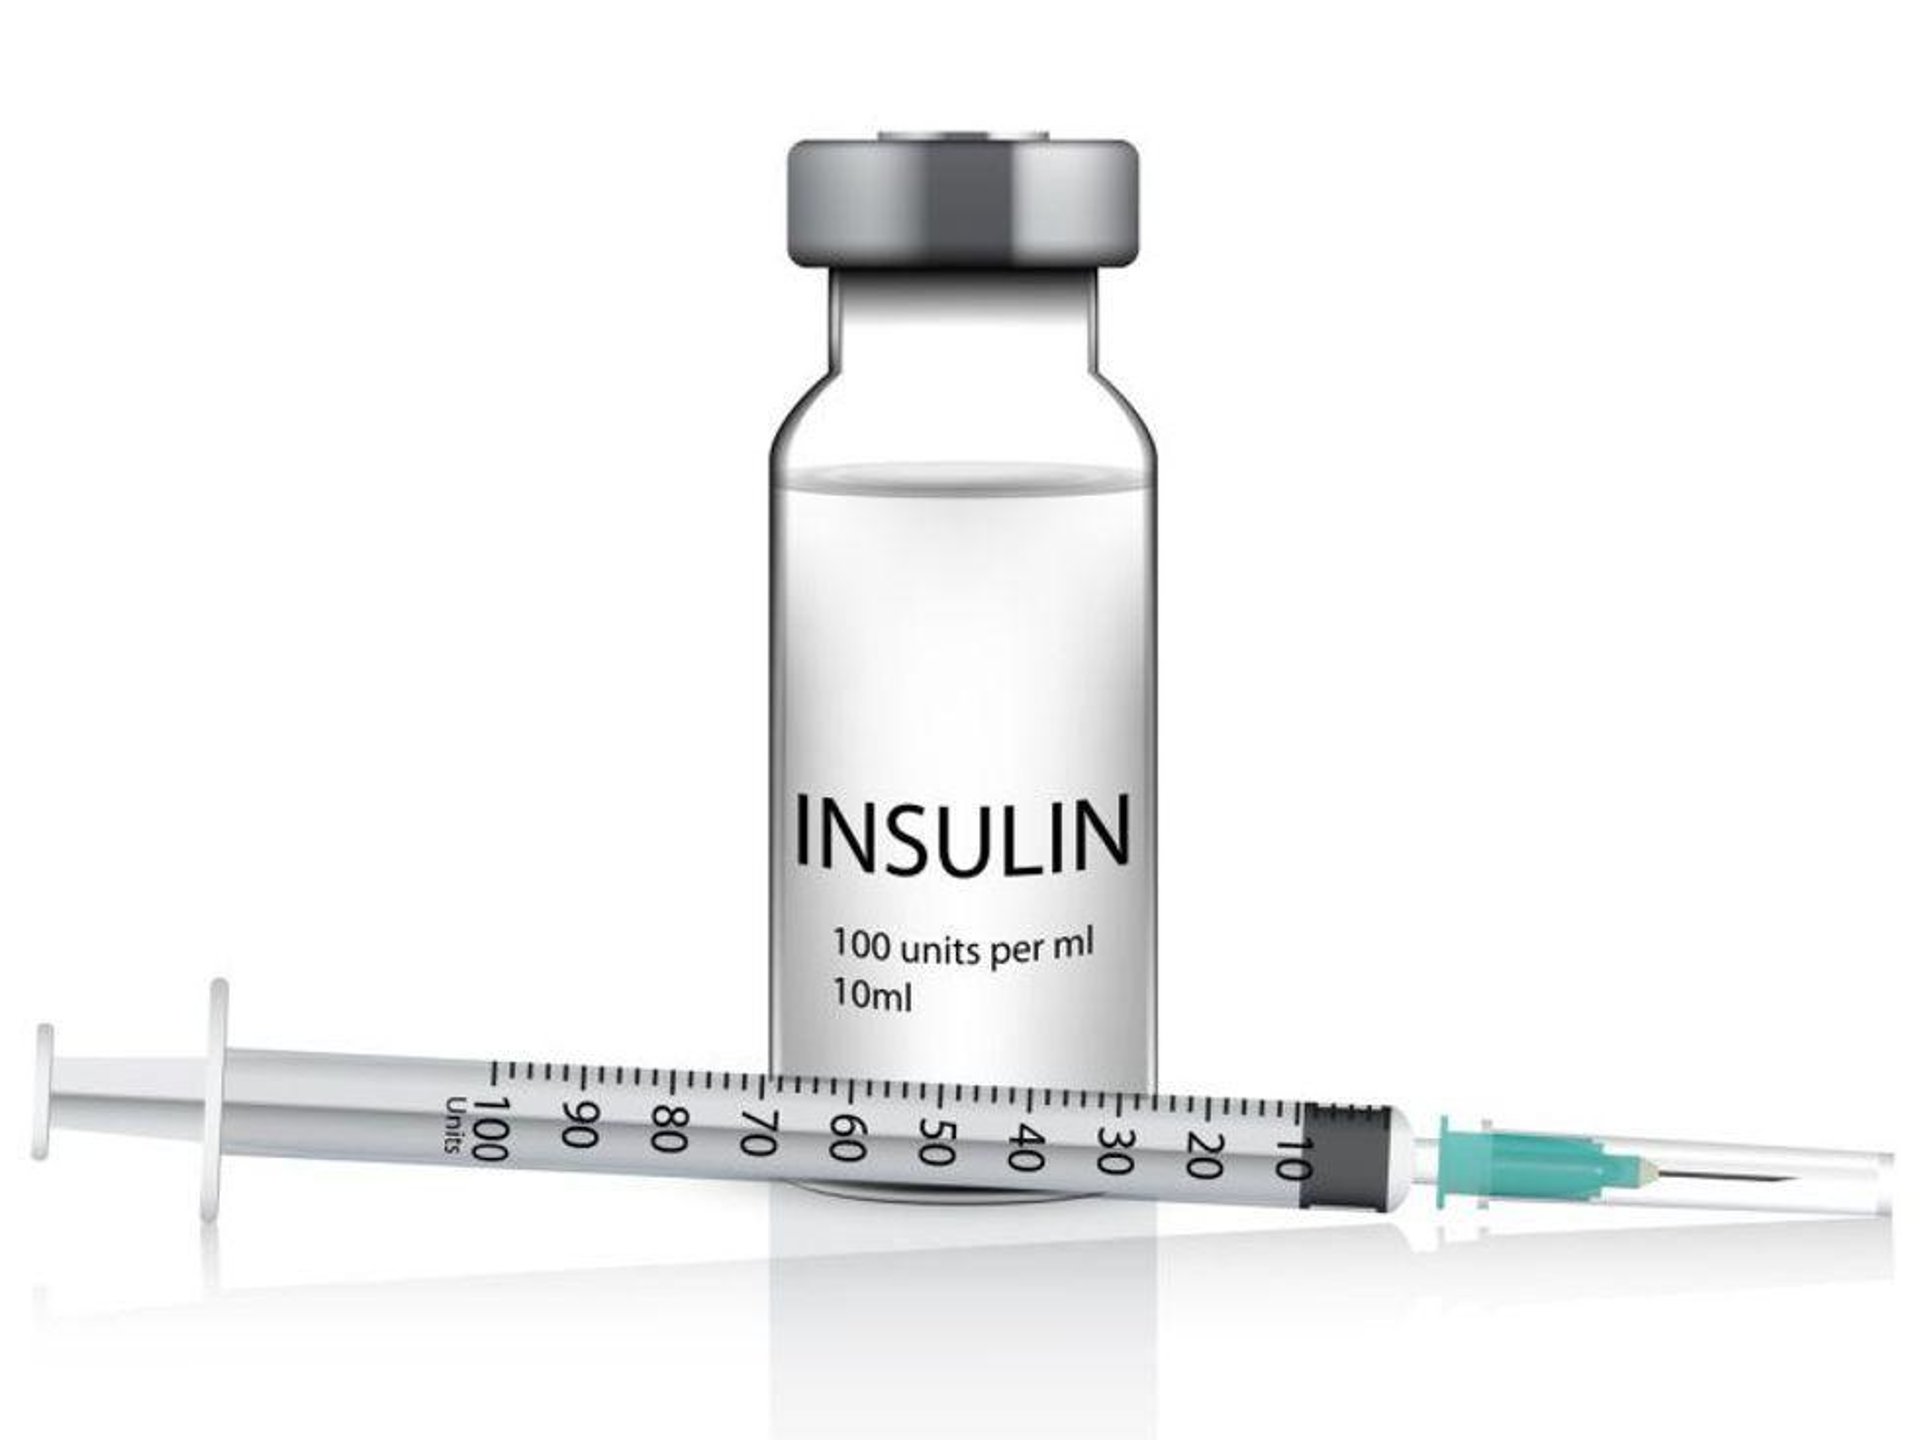 News Picture: California's Plan to Make Low-Priced Insulin Could Be Example for Nation